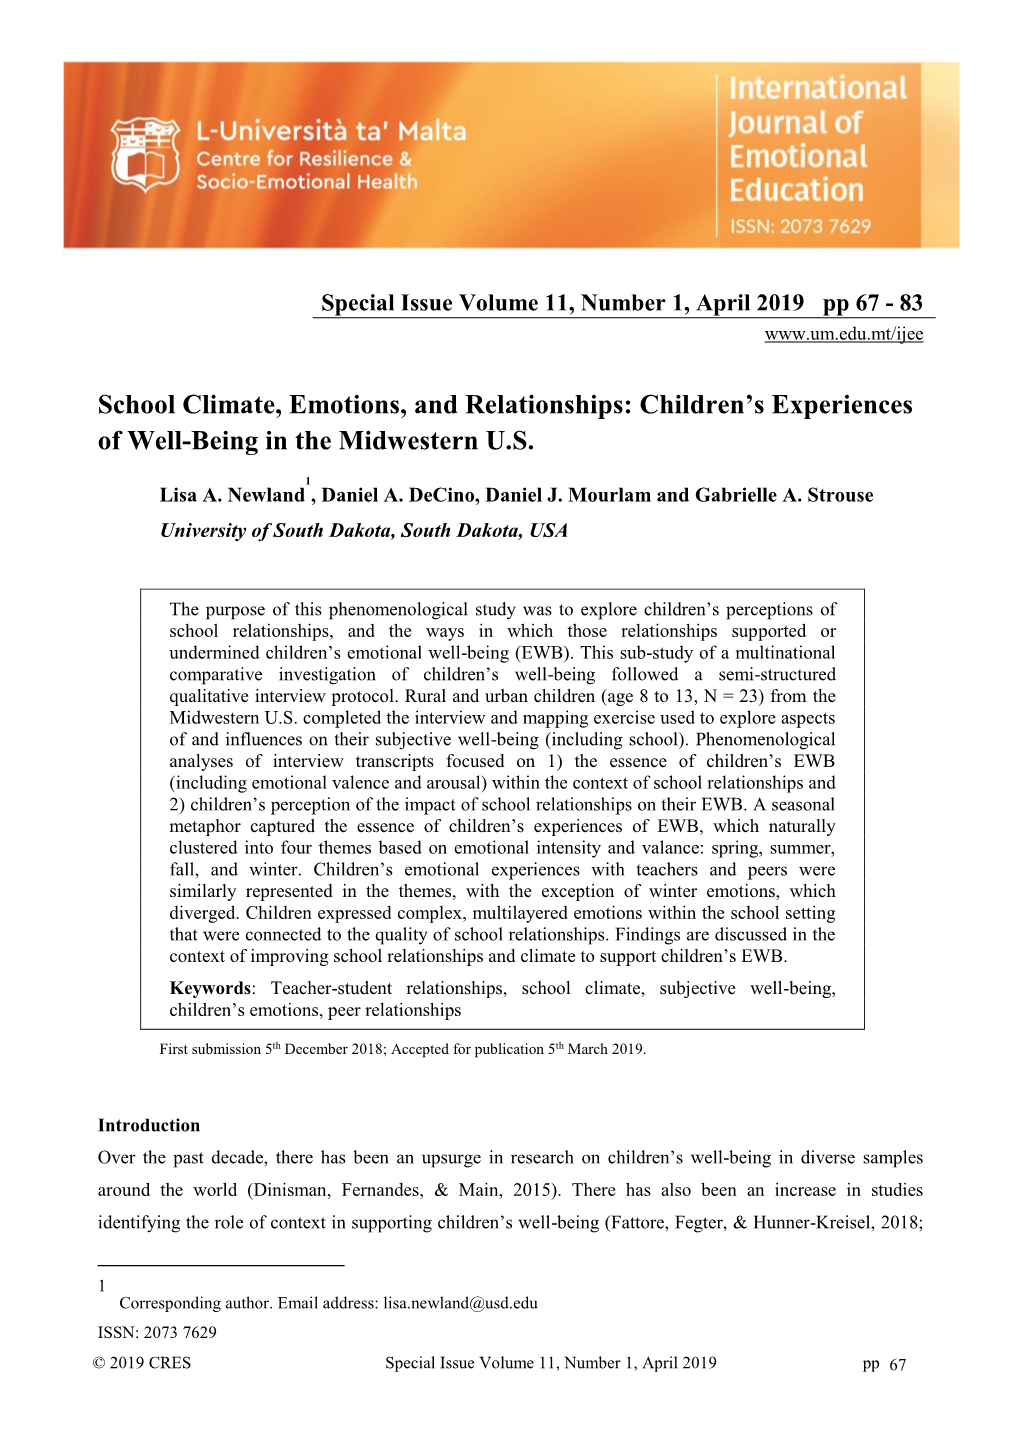 Children's Experiences of Well-Being in the Midwestern US